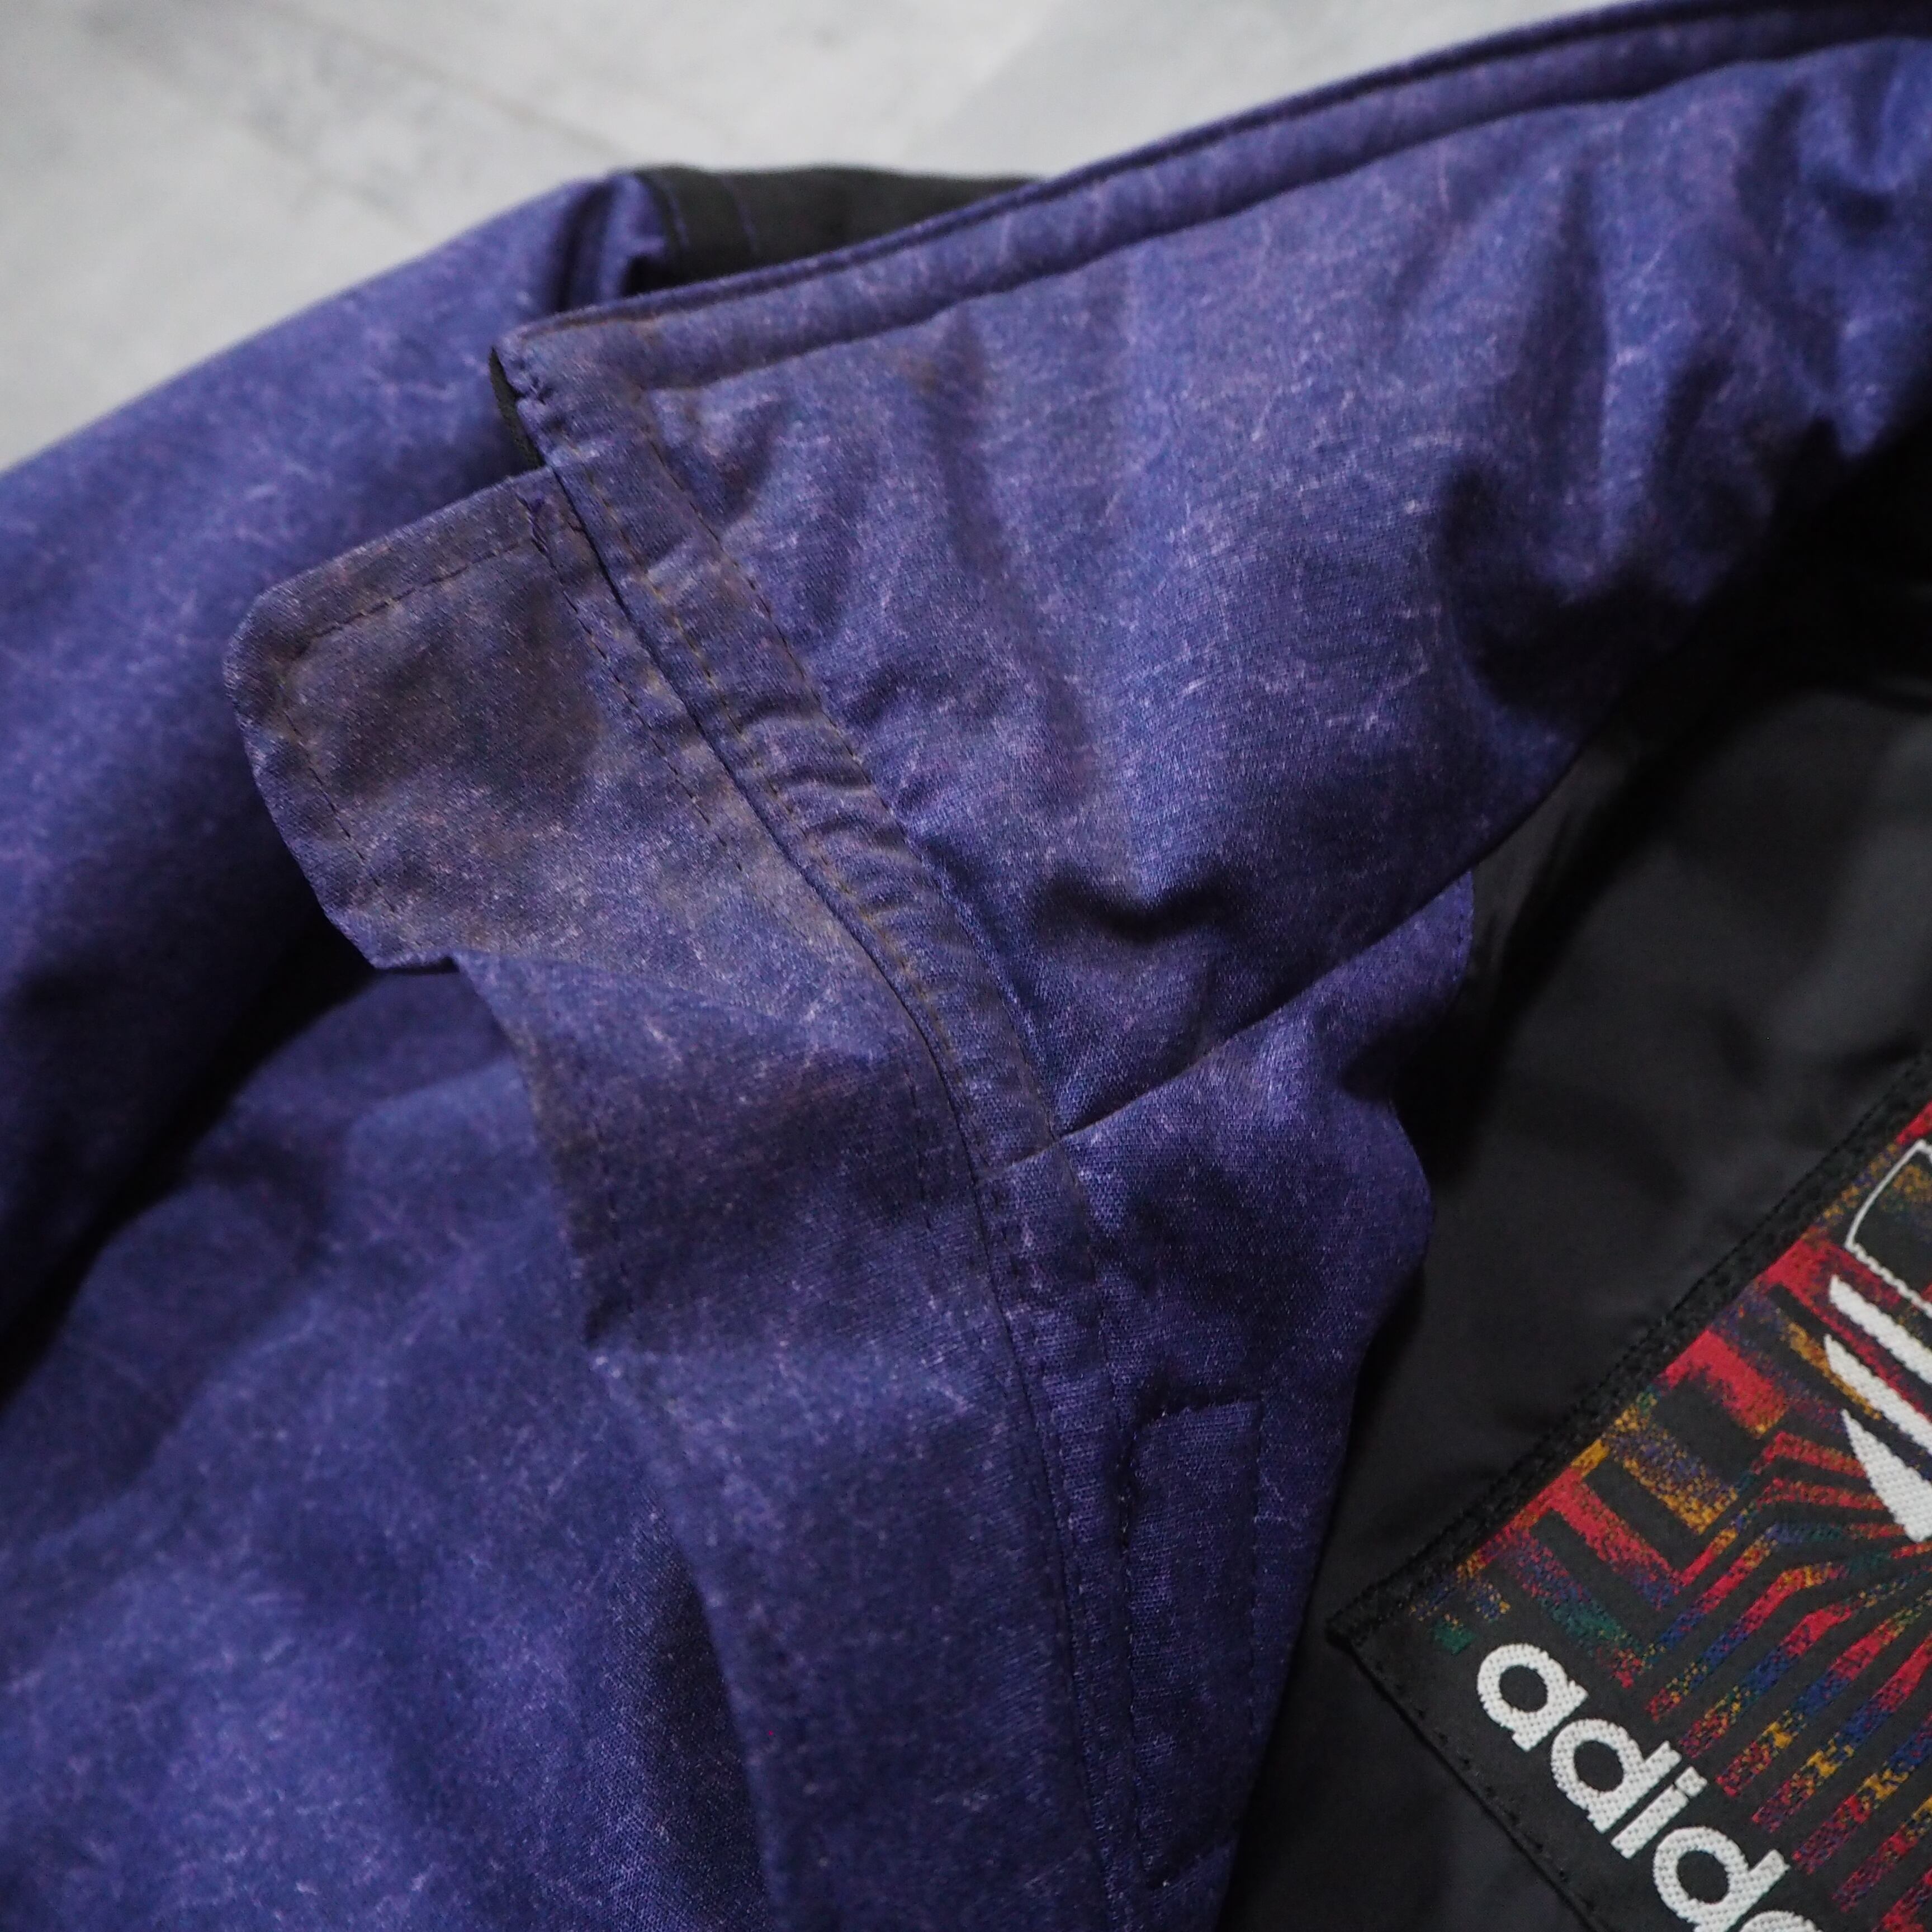 80s-90s “ADIDAS” made by DESCENTE Trefoil logo puff anorak parka 